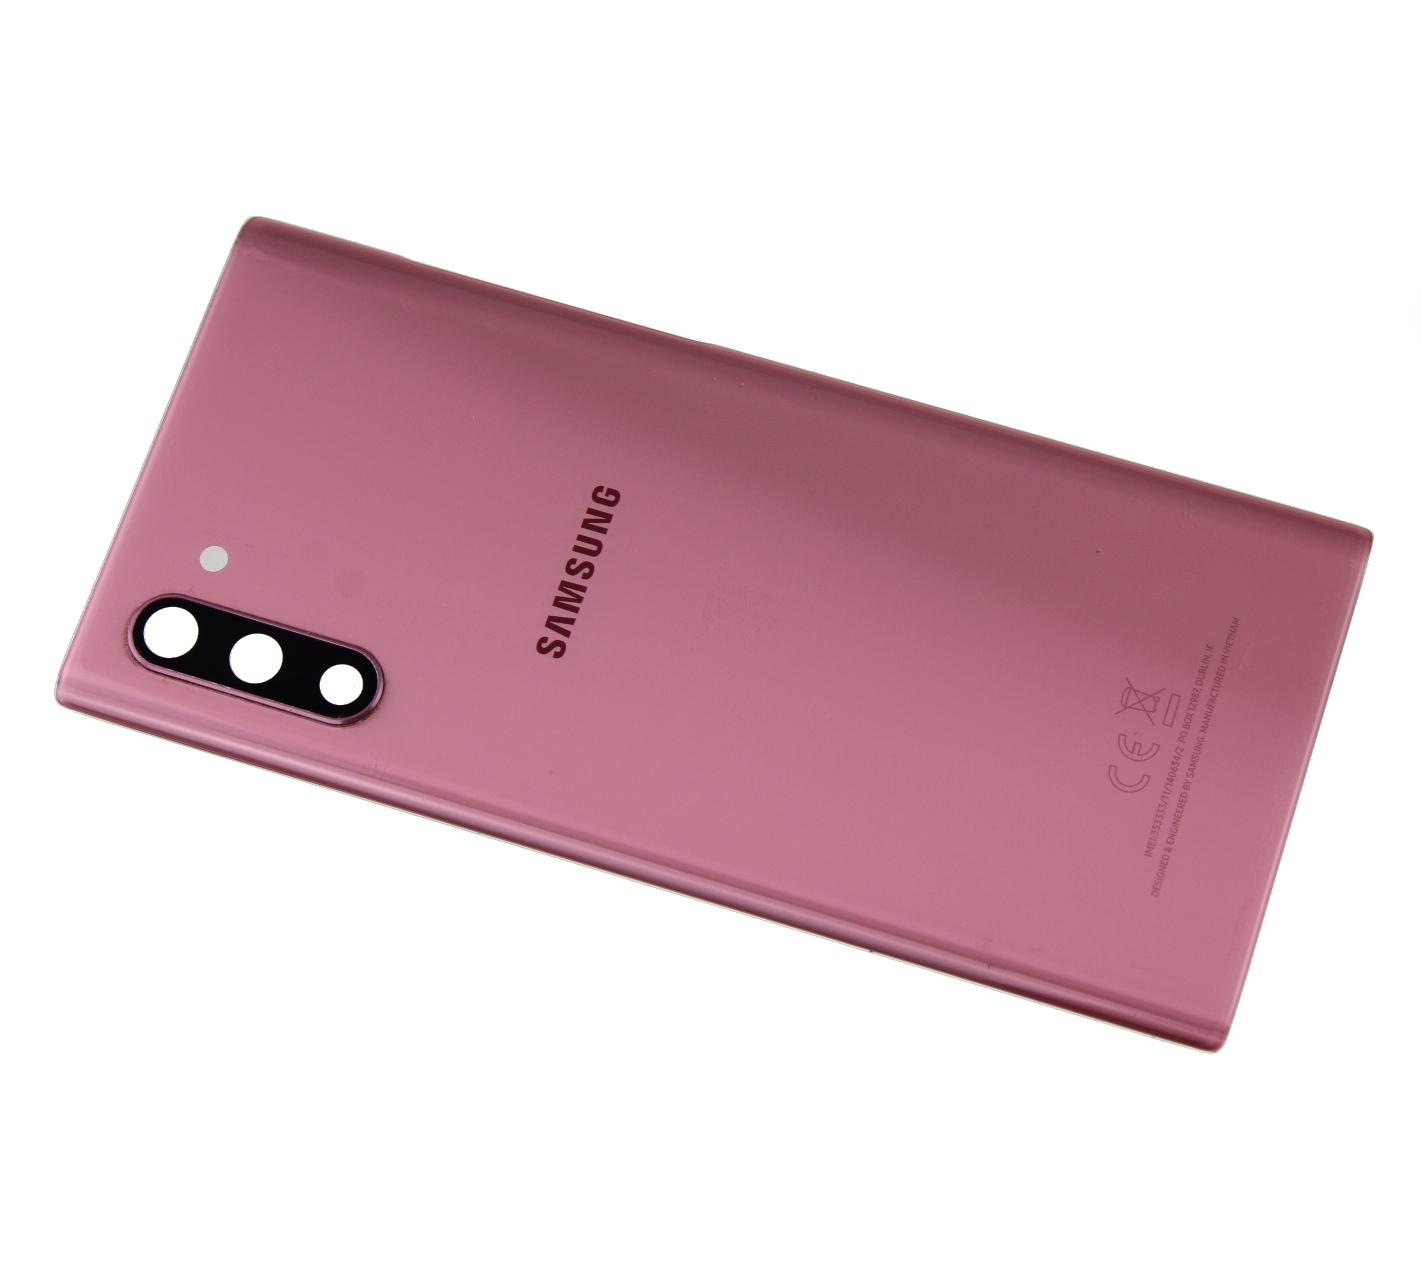 Original Battery cover Samsung SM-N970 Galaxy Note 10 - Pink (Disassembly) Grade A